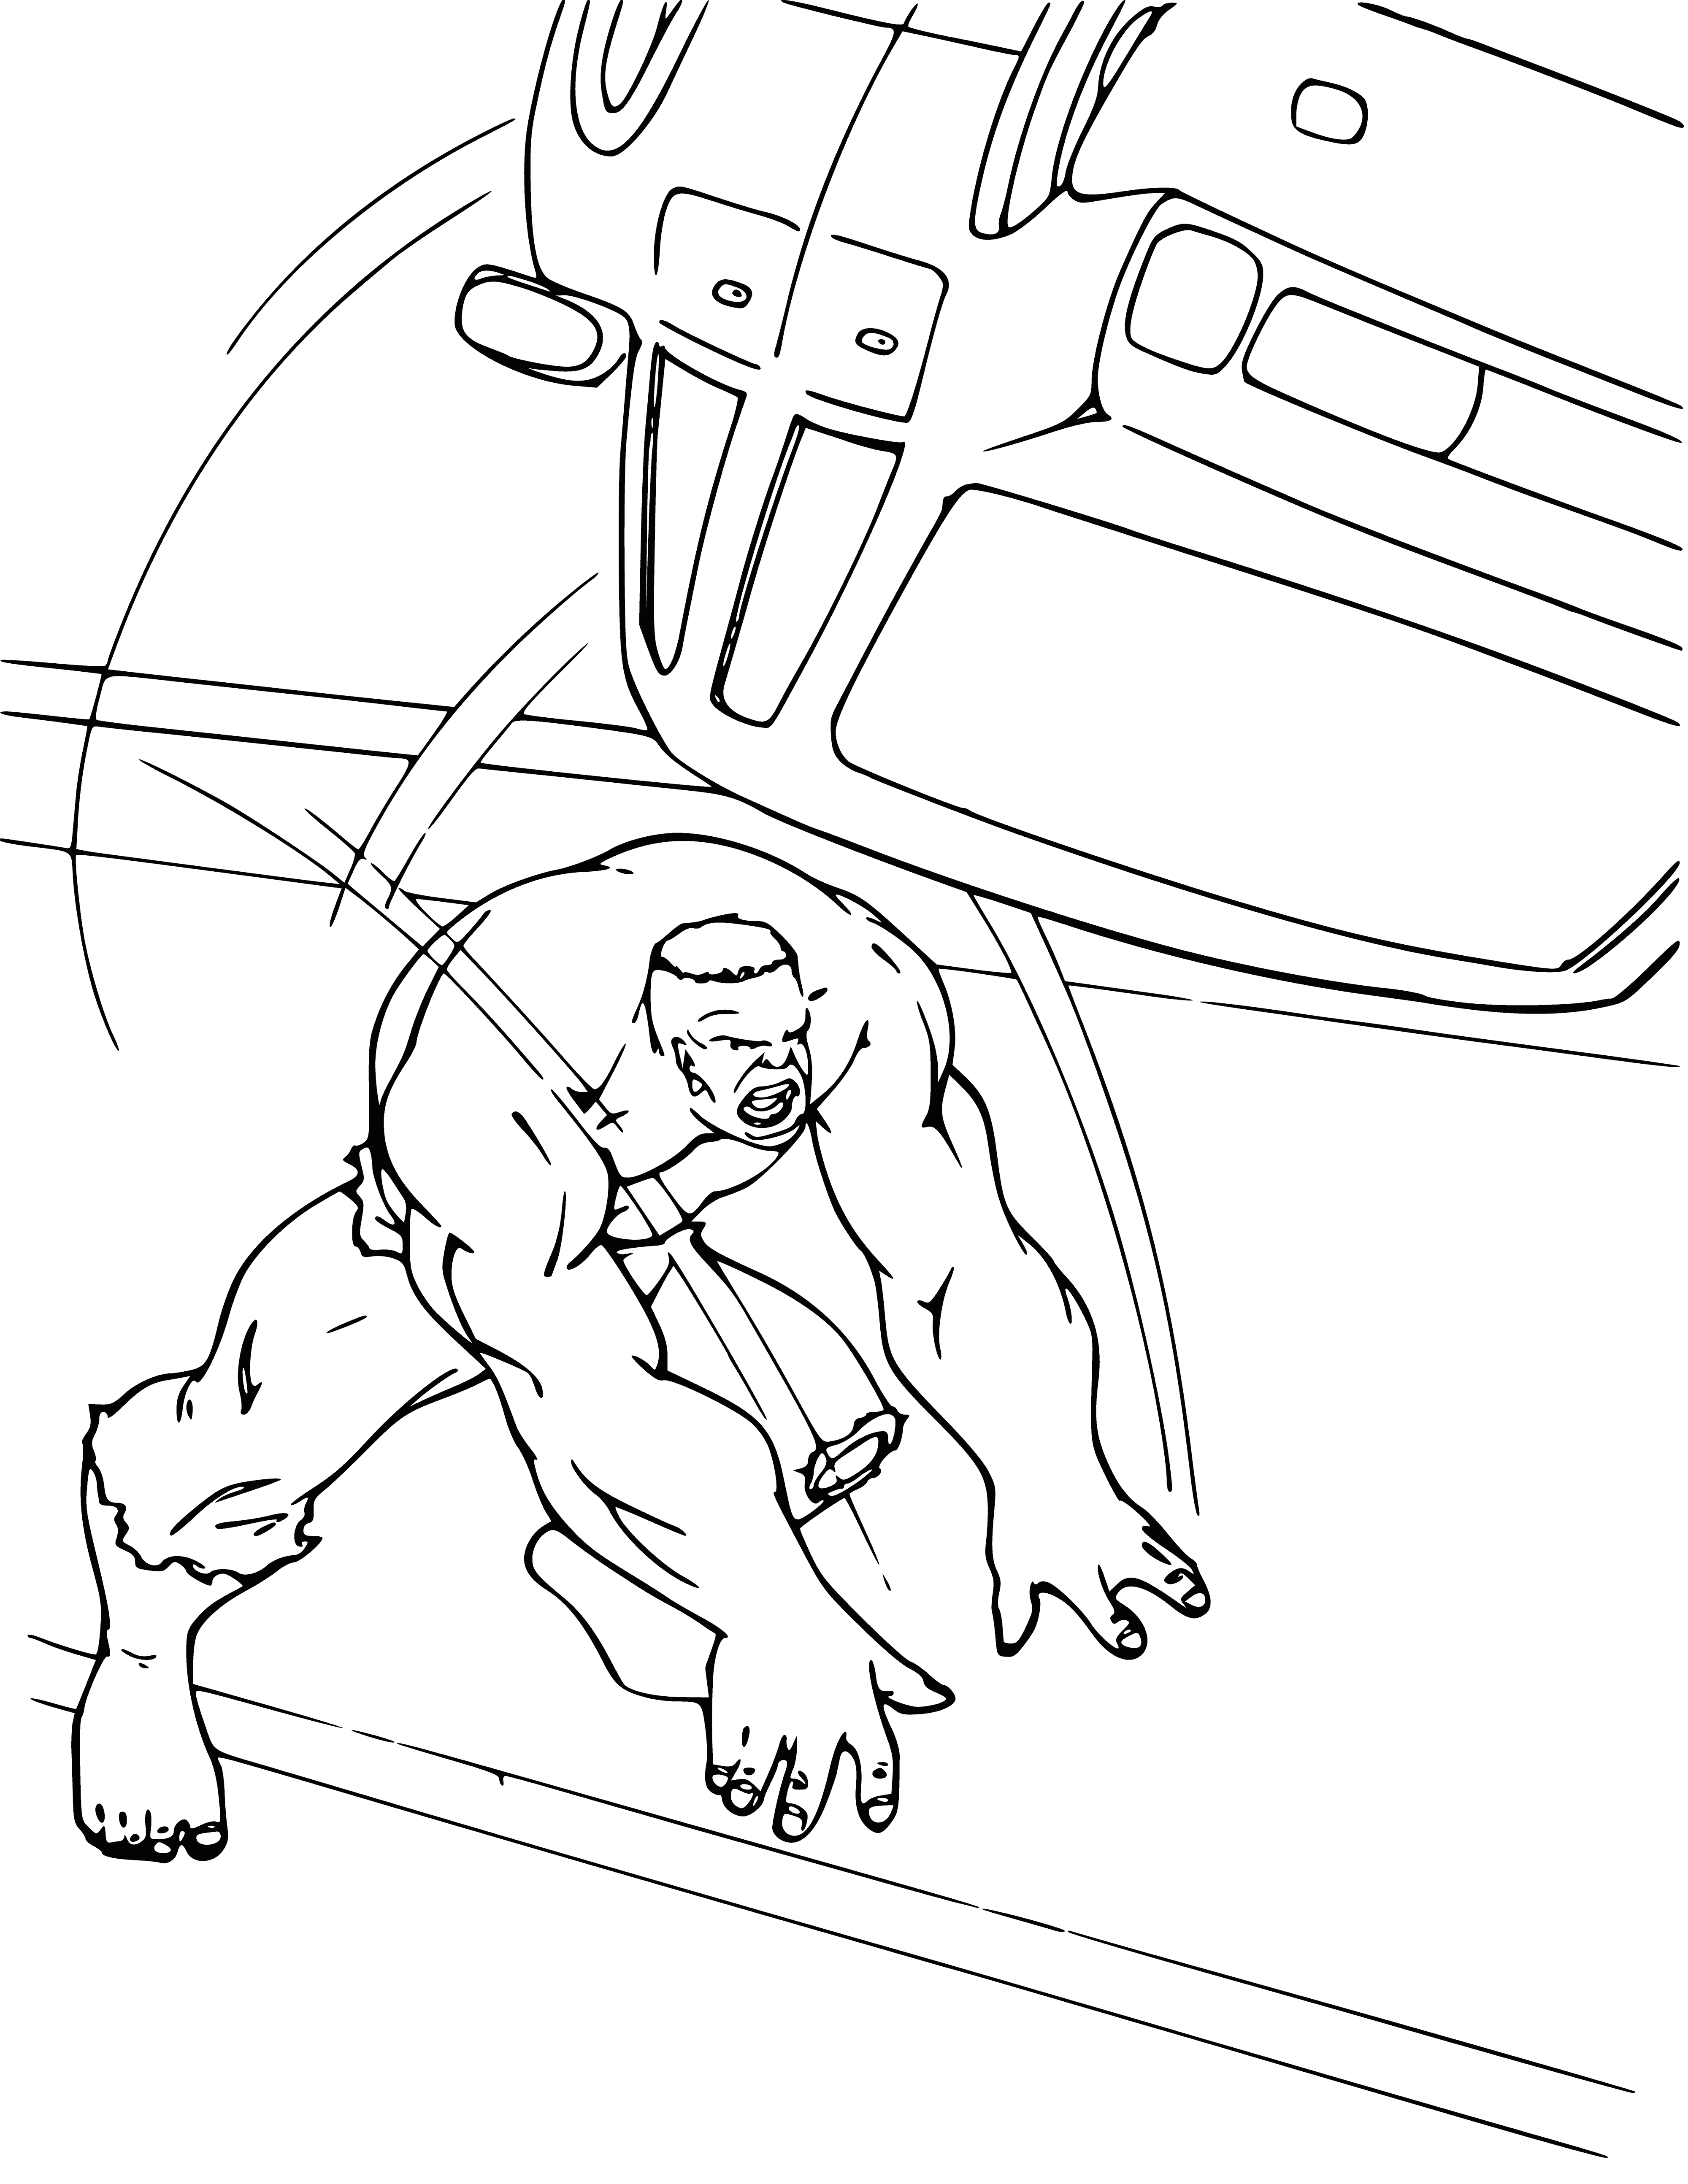 coloring page: The Hulk is a muscular green humanoid with incredible strength, shown performing amazing feats such as tearing cars in half.